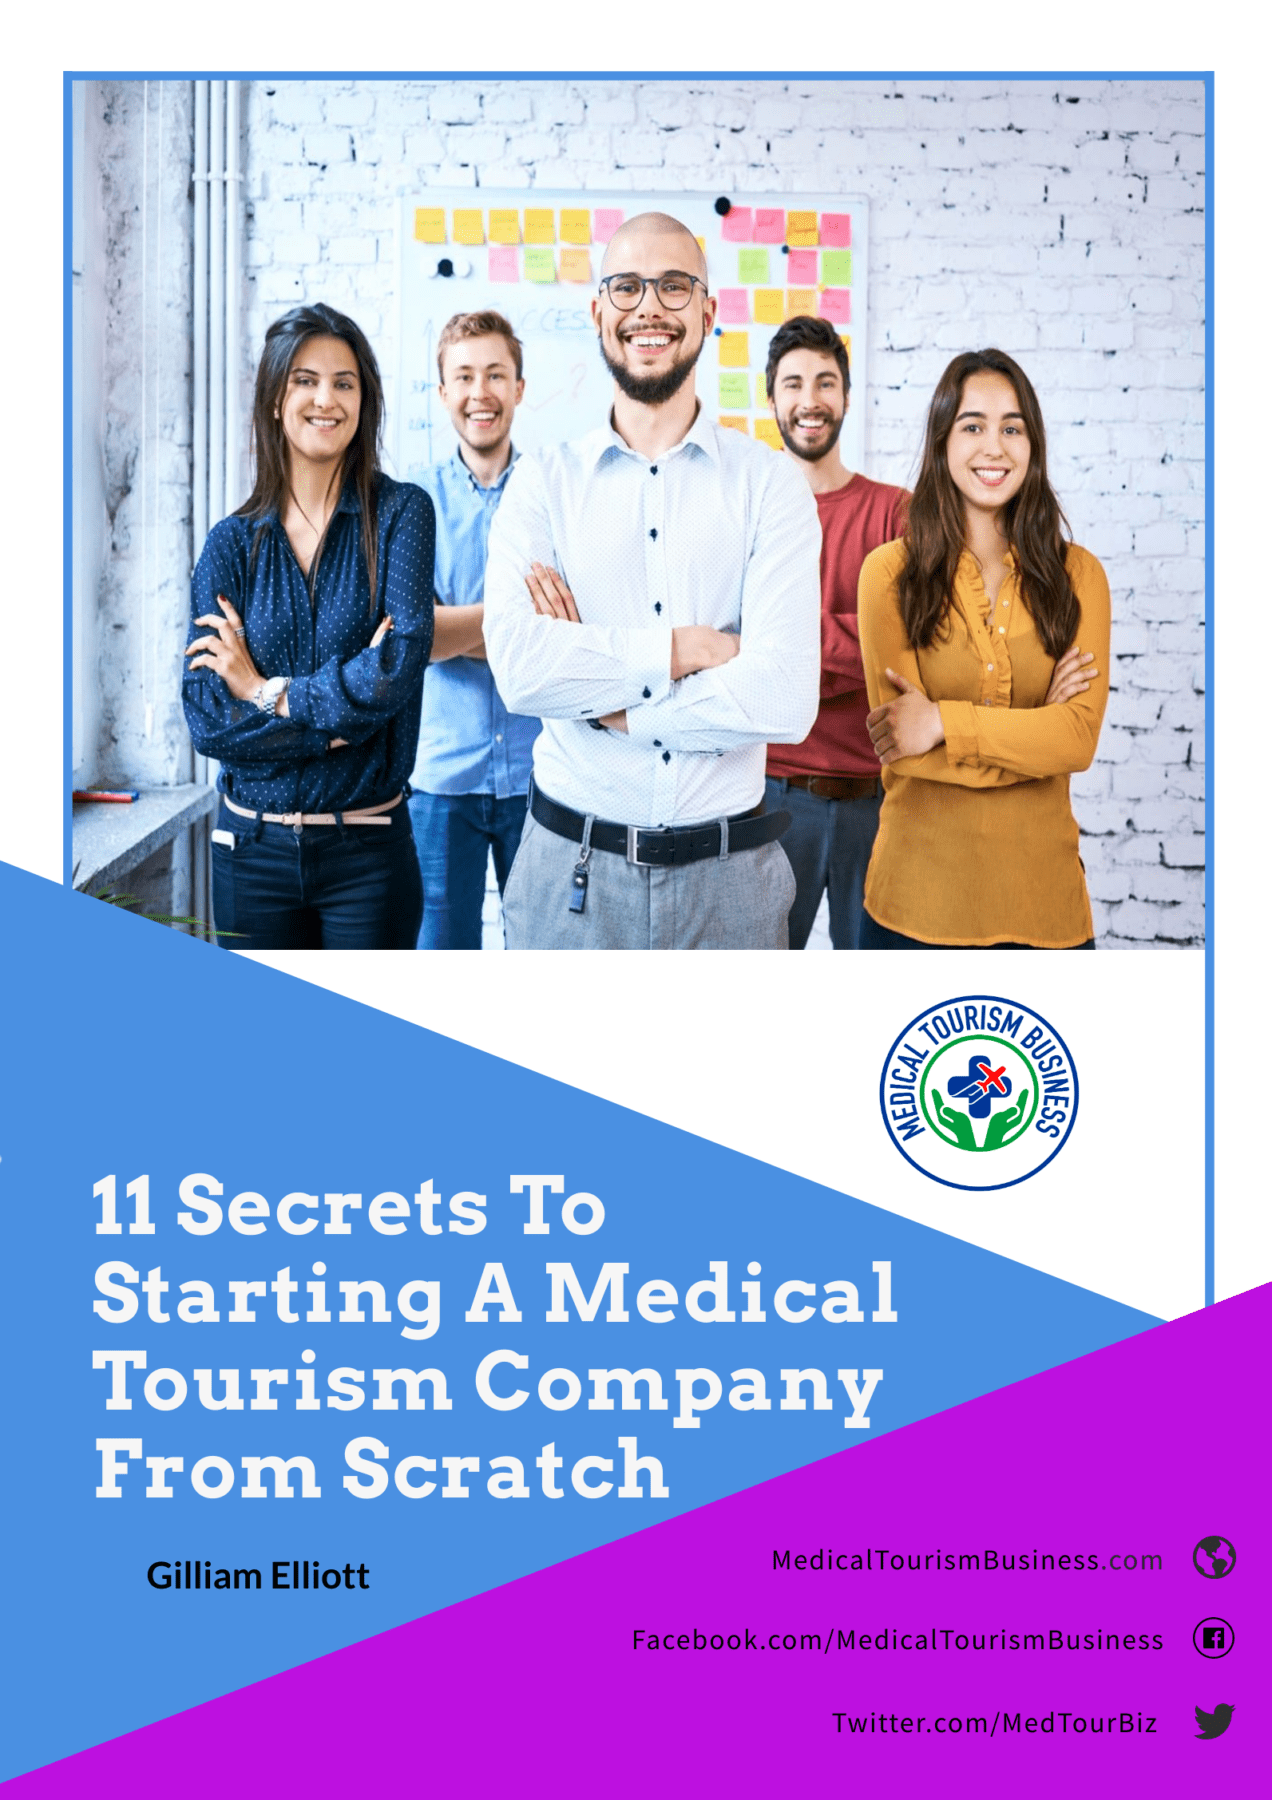 OFFICIAL COVER FOR MTB 11 SECRETES TO STARTING A MEDICAL TOURISM COMPANY